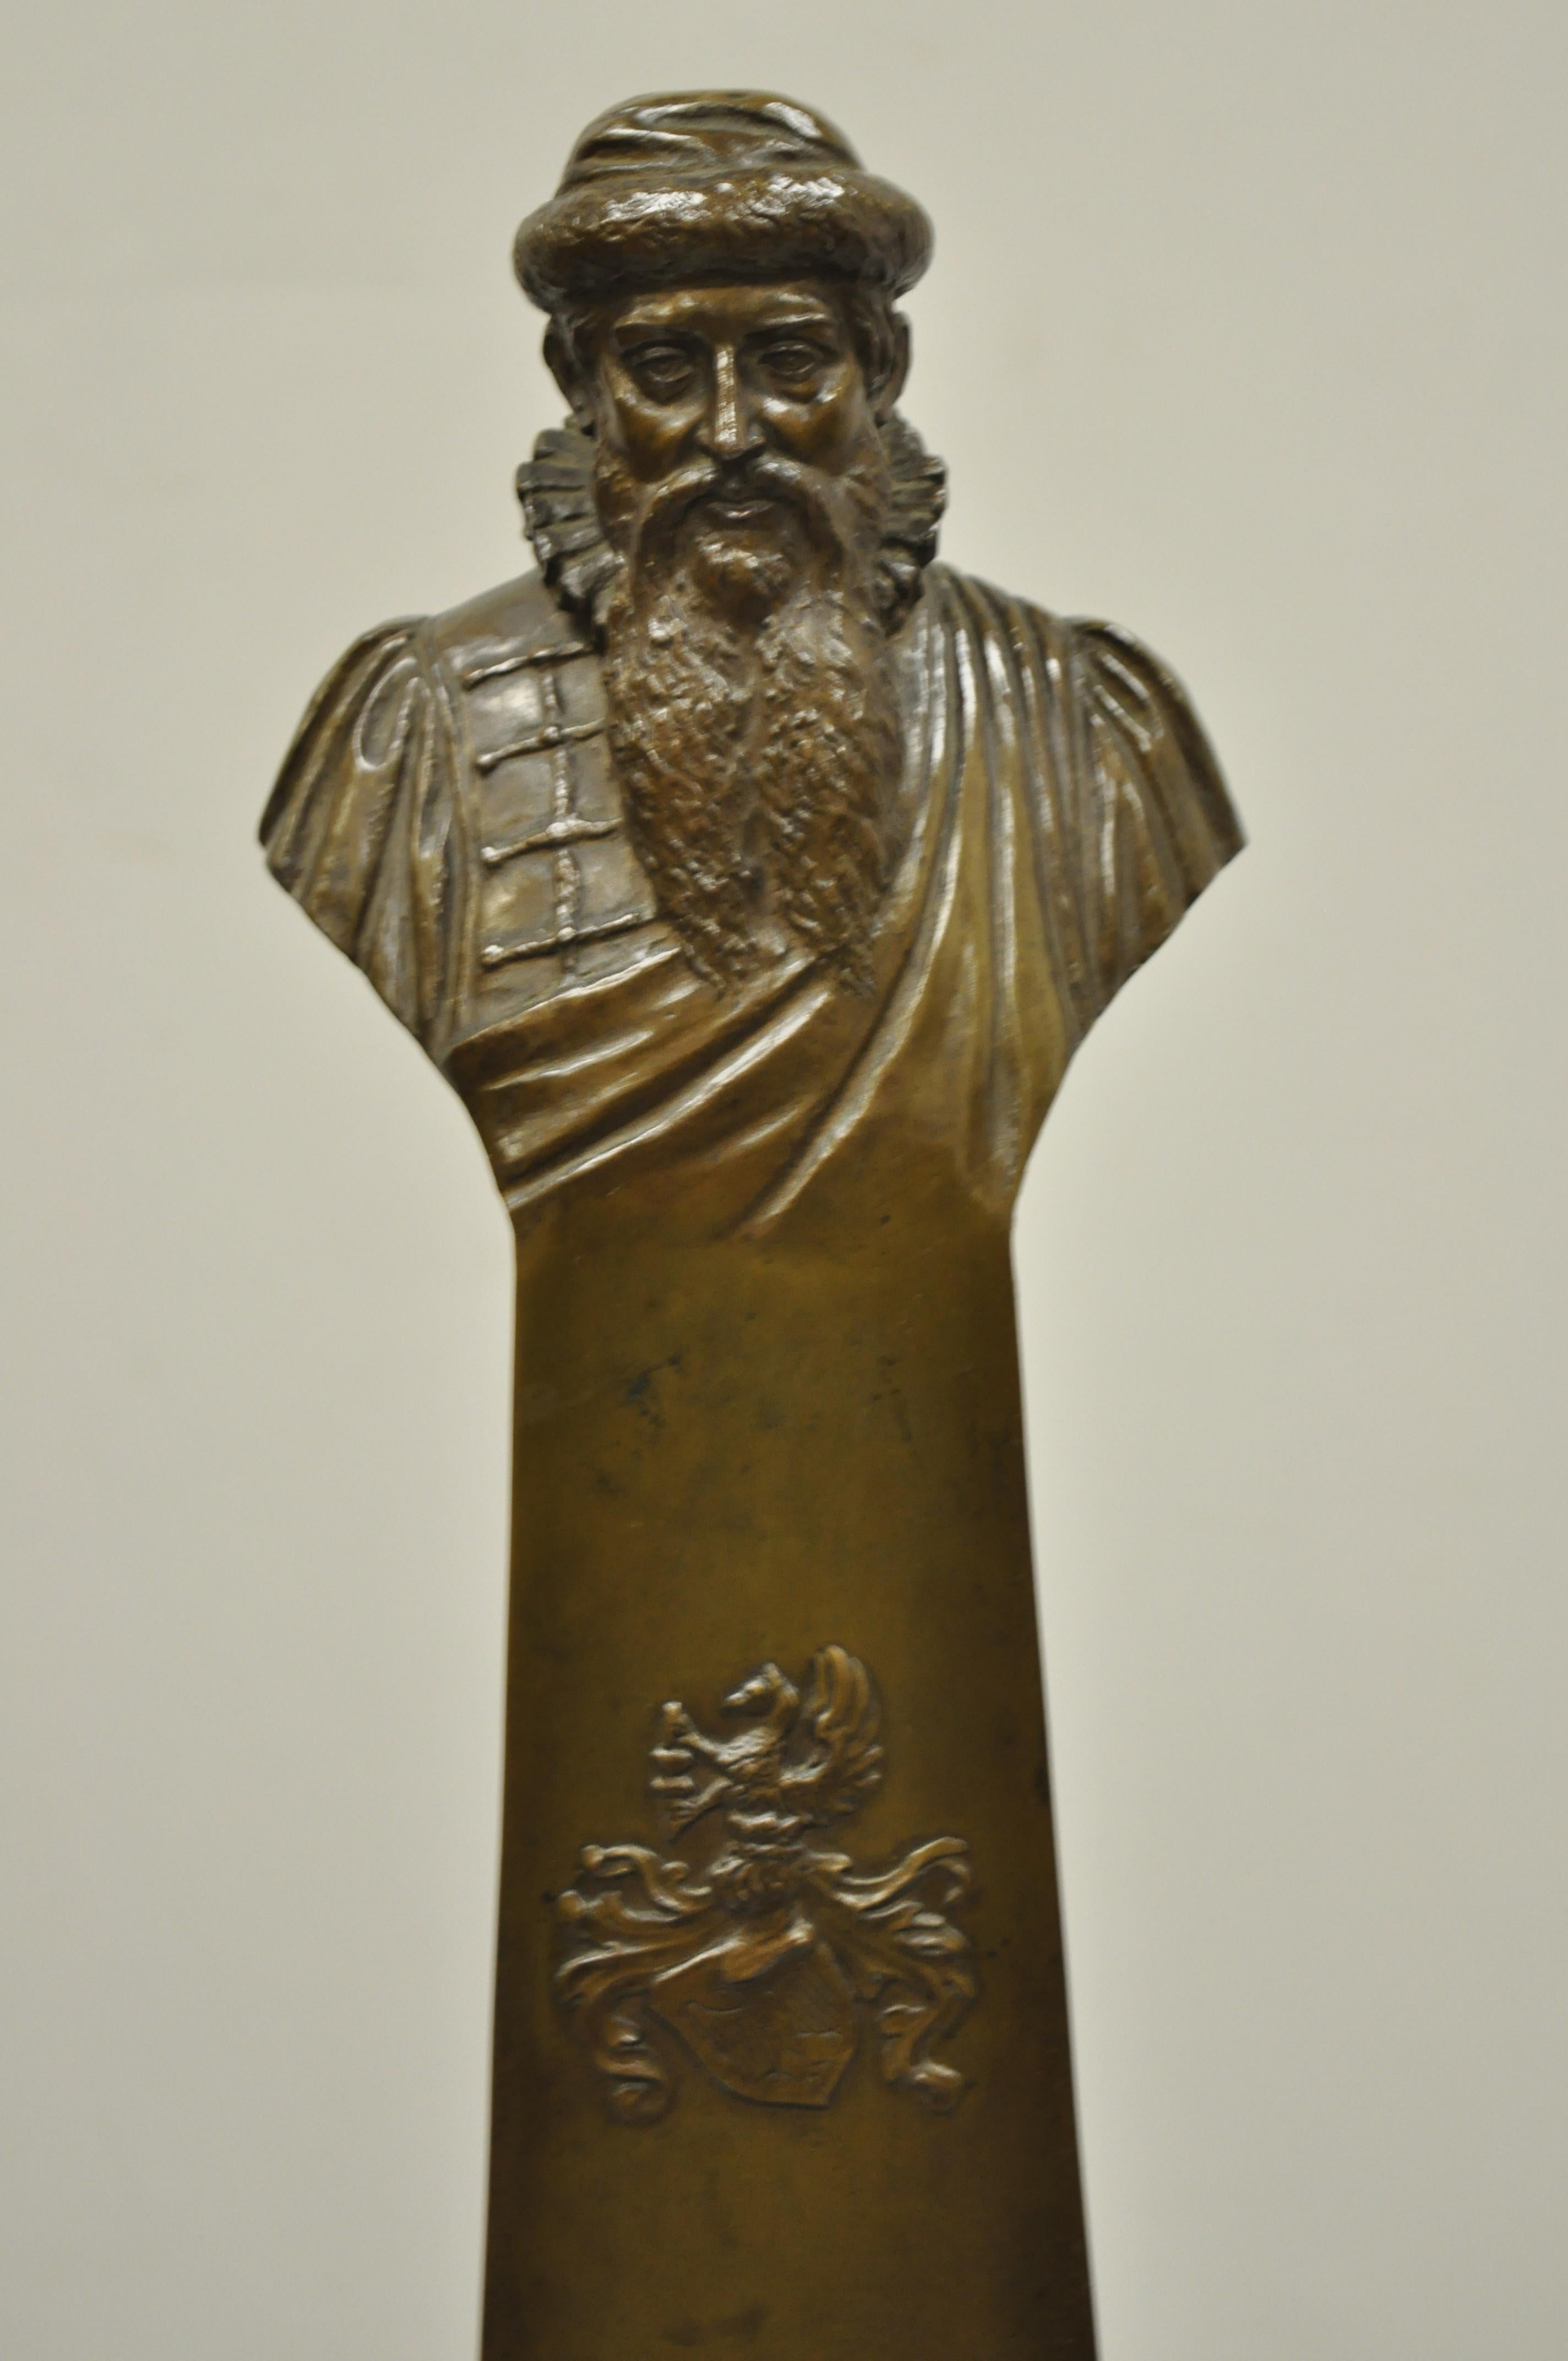 Antique bronze and marble bust of Elizabethan Man by Arthur Konn, circa 1920. Item includes signed 